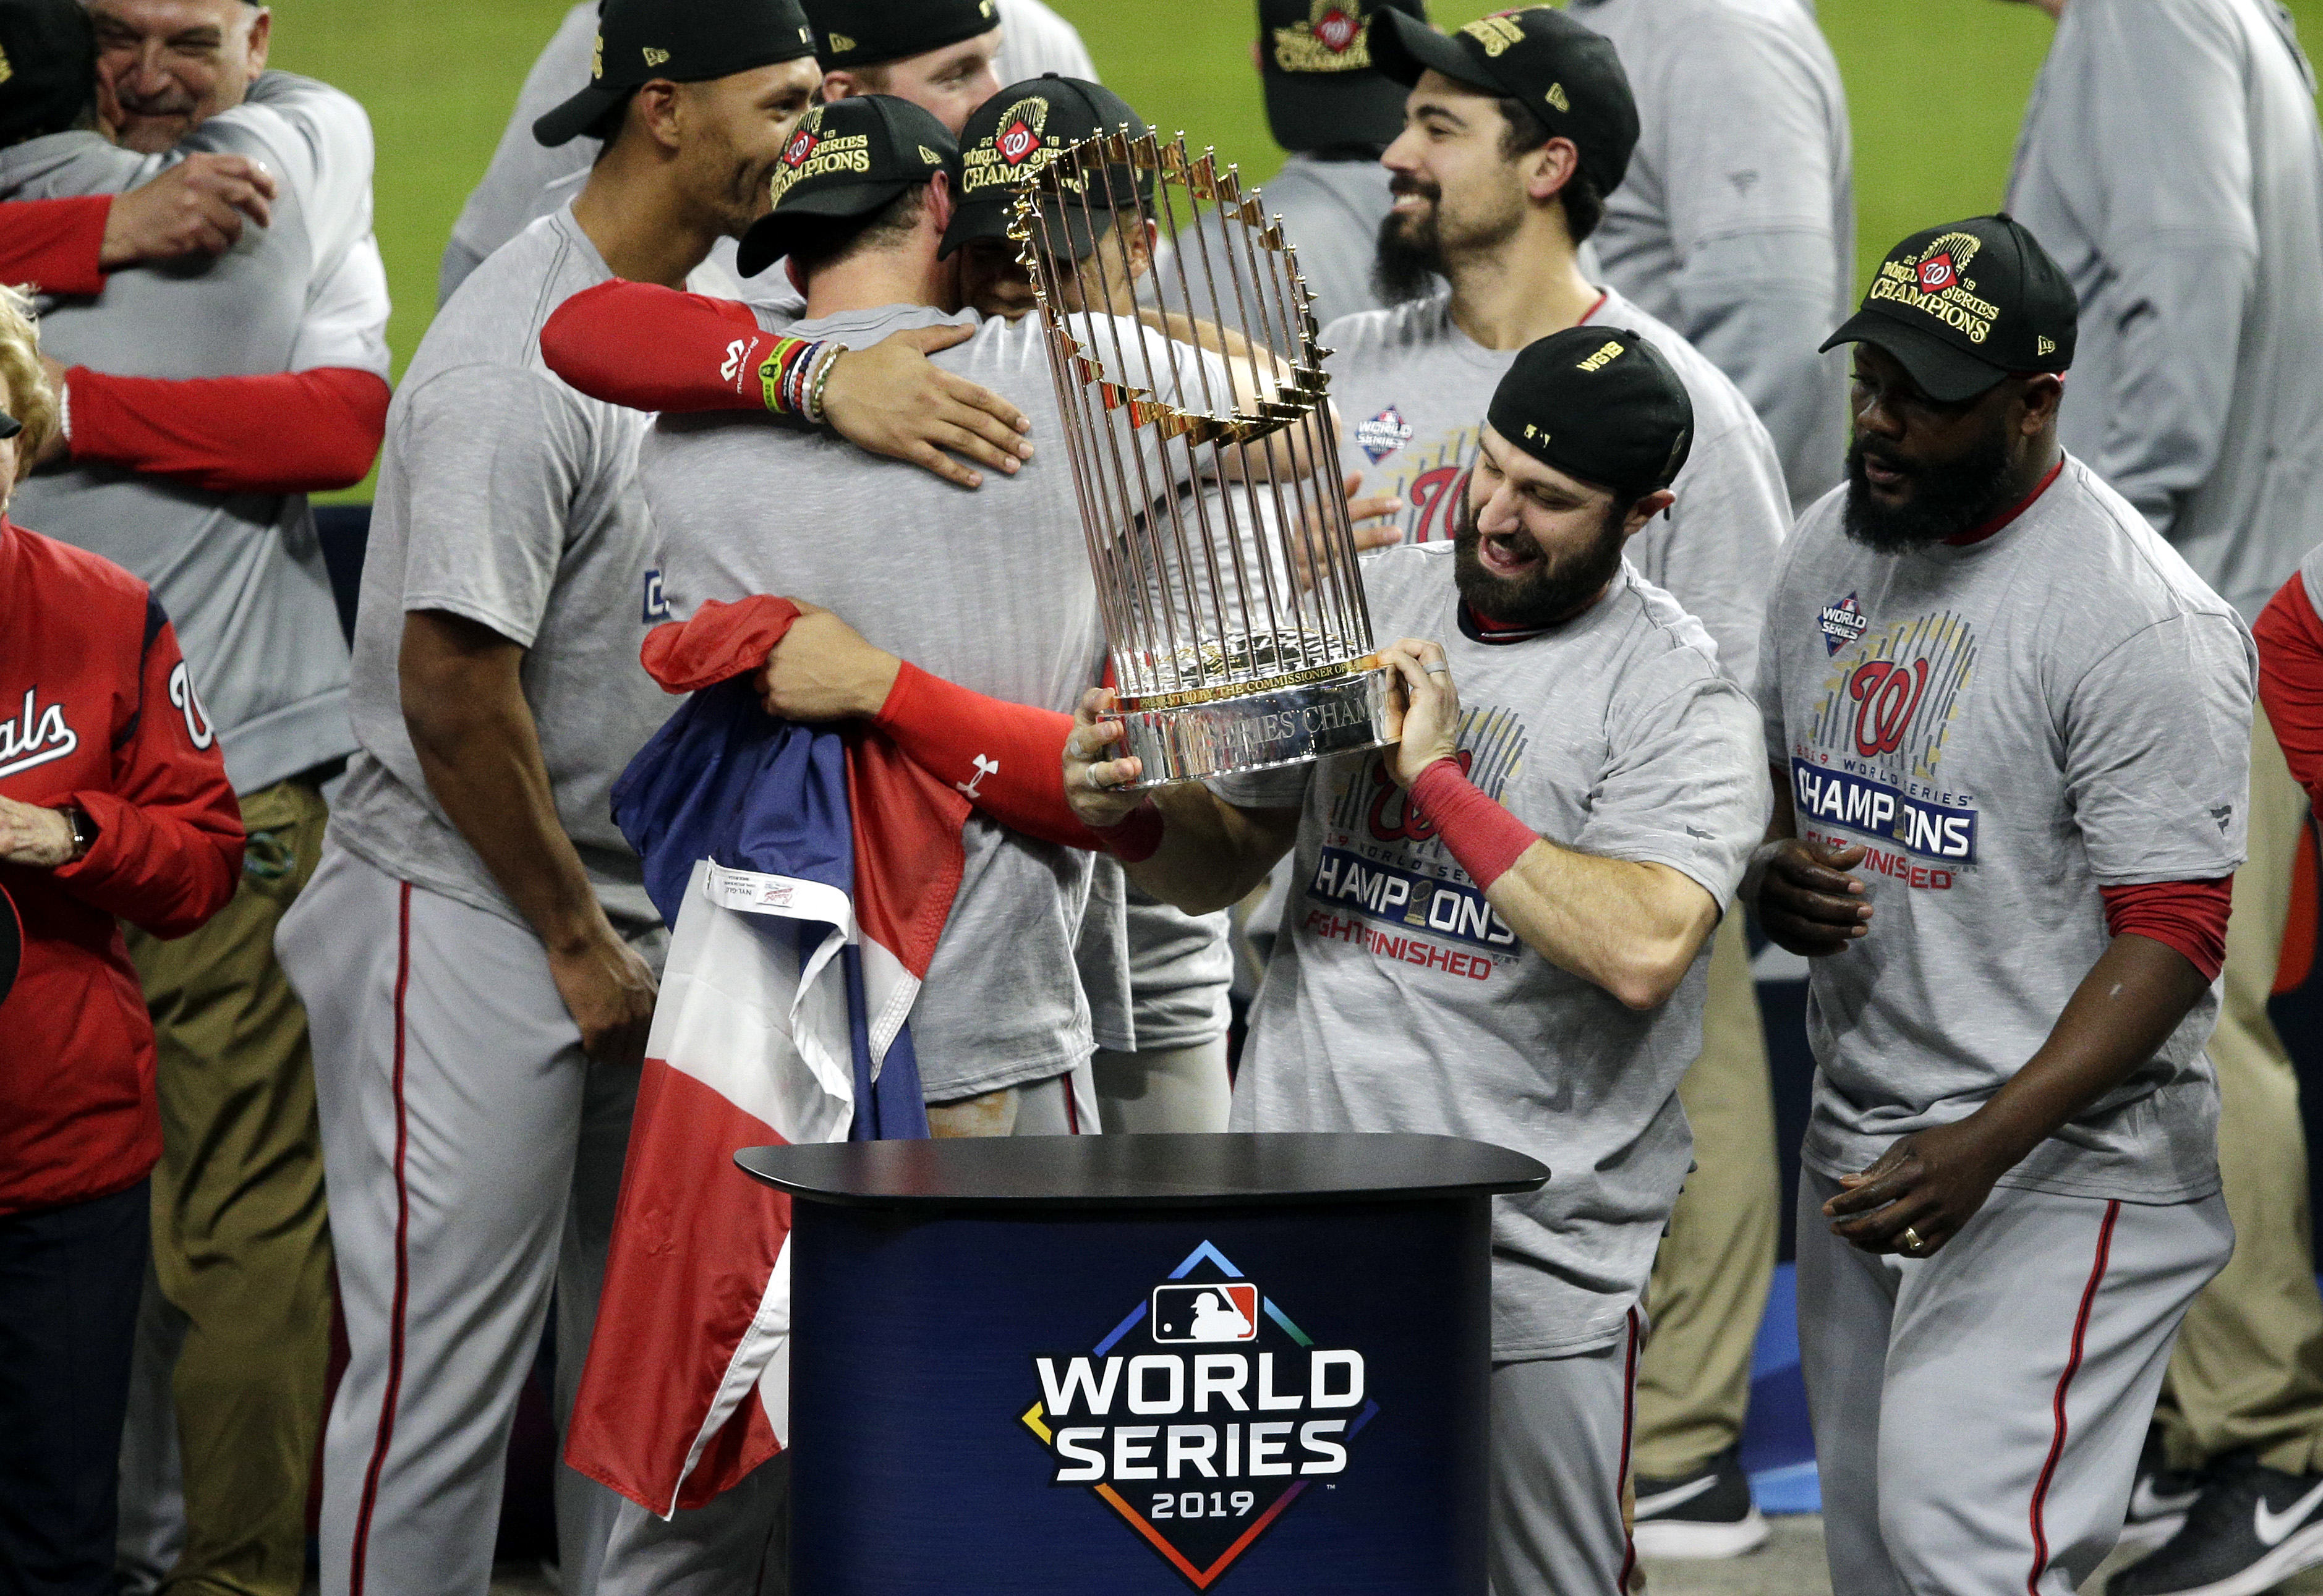 The Nationals' 2019 World Series Triumph Was a Decade in the